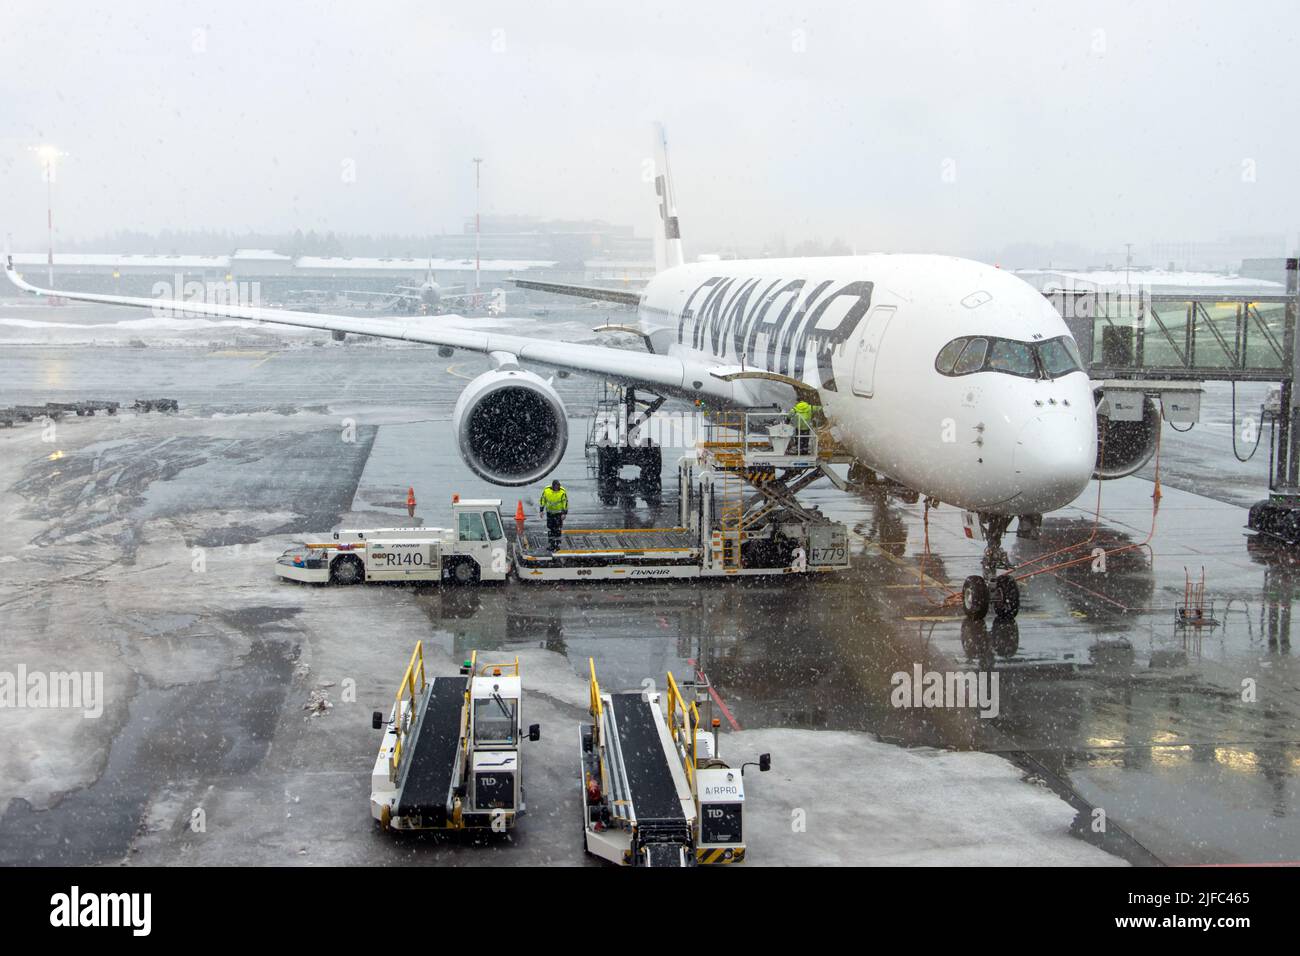 HELSINKI, FNLAND, FEB 15 2022, Snow falls on the airport, where the plane is loaded before takeoff, Helsinki Airport, Finland. Stock Photo